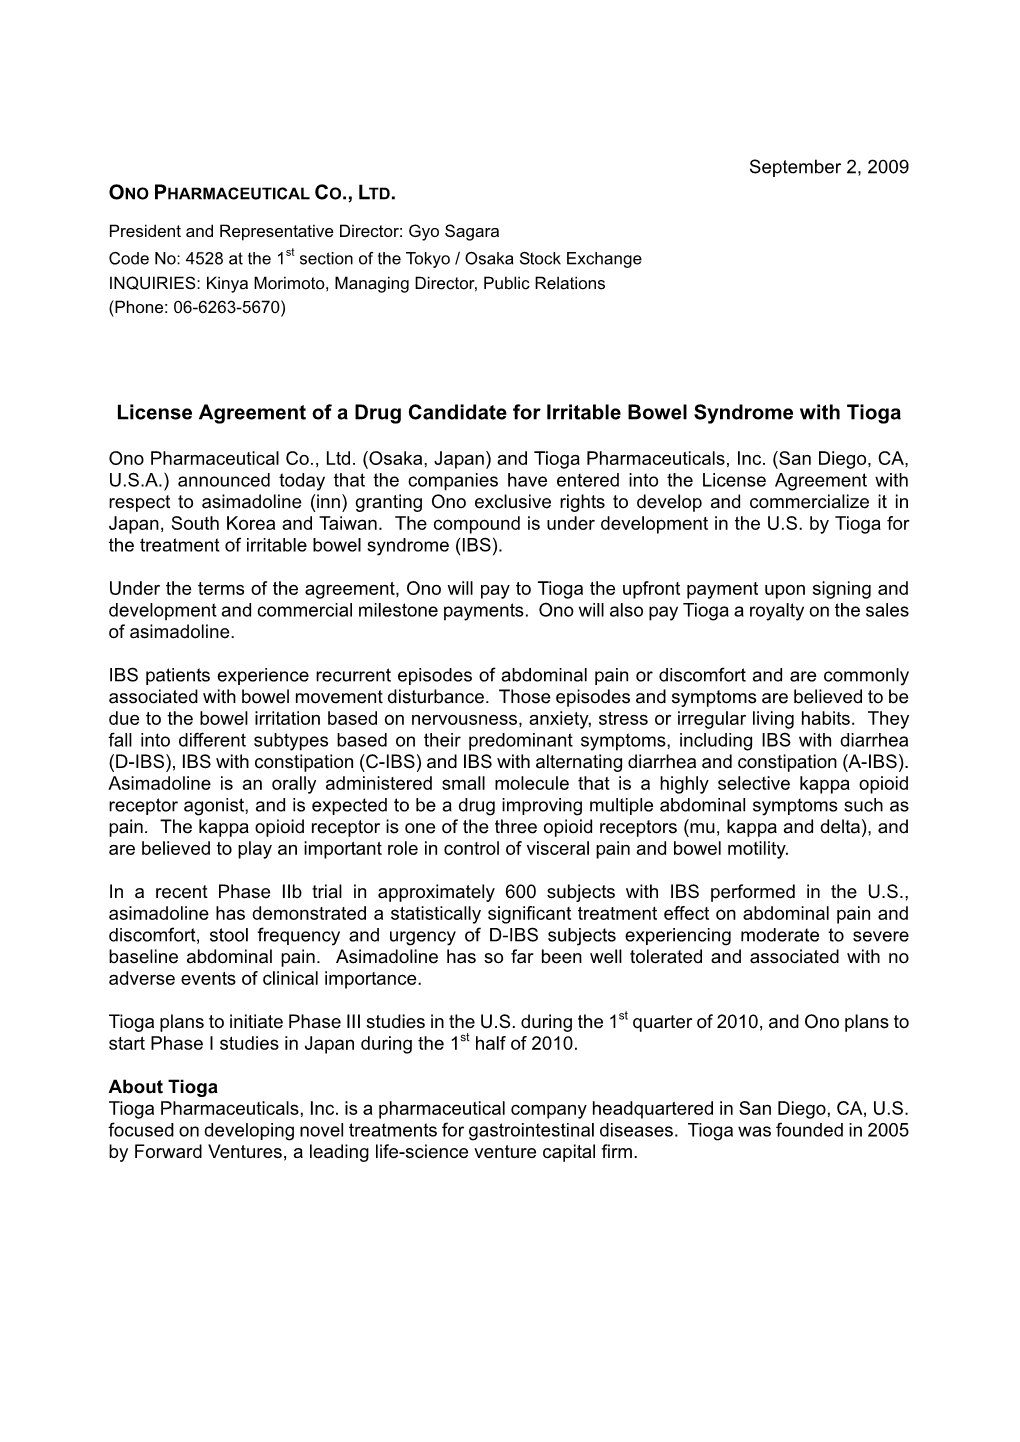 License Agreement of a Drug Candidate for Irritable Bowel Syndrome with Tioga